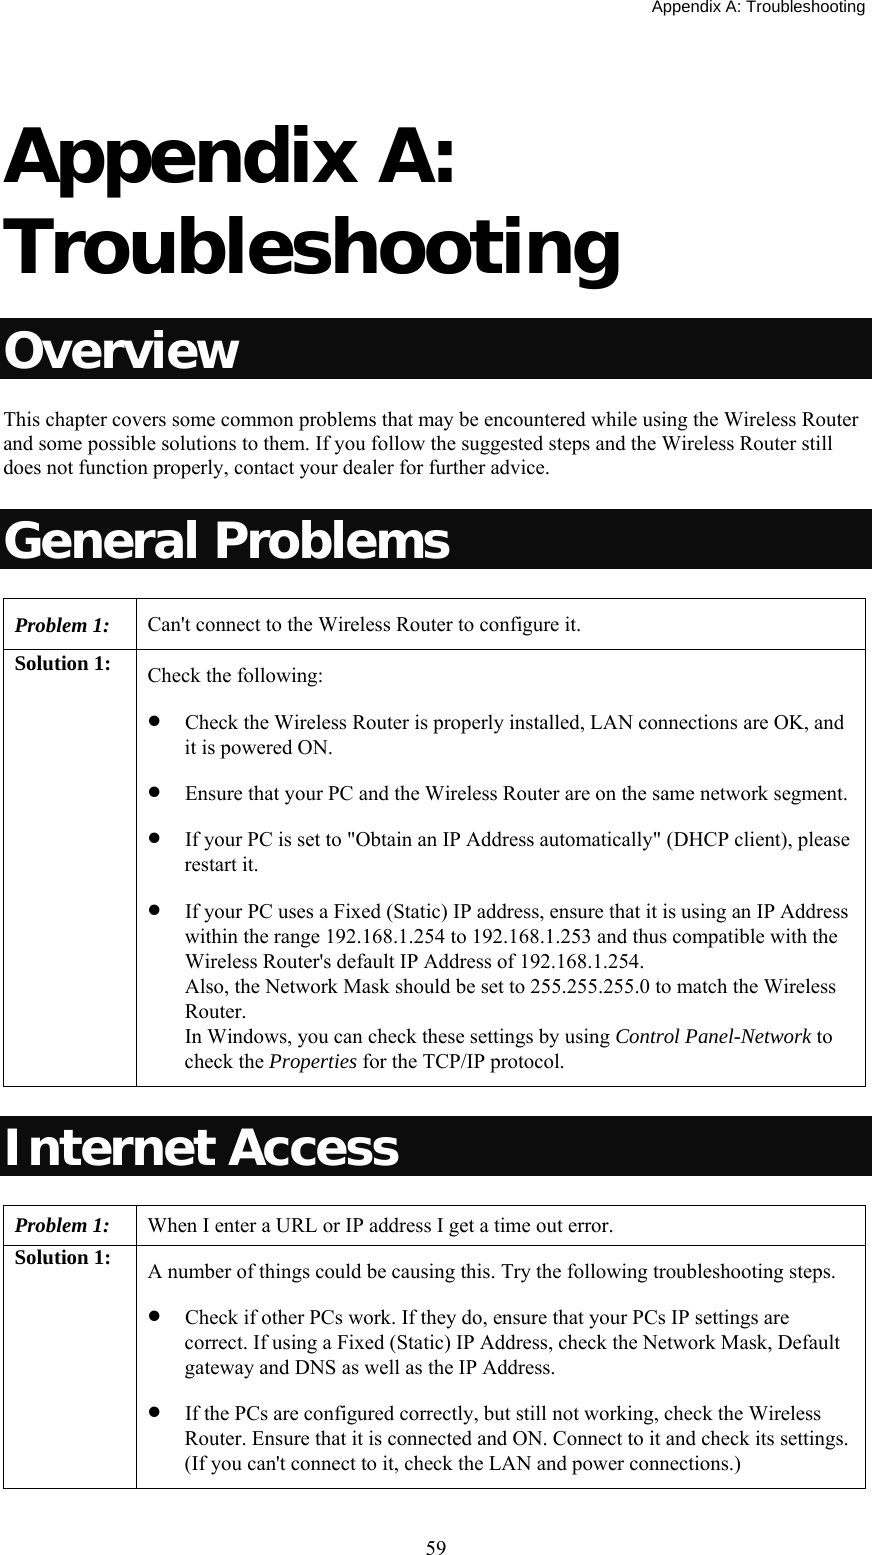   Appendix A: Troubleshooting  59 Appendix A: Troubleshooting Overview This chapter covers some common problems that may be encountered while using the Wireless Router and some possible solutions to them. If you follow the suggested steps and the Wireless Router still does not function properly, contact your dealer for further advice. General Problems Problem 1:  Can&apos;t connect to the Wireless Router to configure it. Solution 1:  Check the following: • Check the Wireless Router is properly installed, LAN connections are OK, and it is powered ON. • Ensure that your PC and the Wireless Router are on the same network segment. • If your PC is set to &quot;Obtain an IP Address automatically&quot; (DHCP client), please restart it. • If your PC uses a Fixed (Static) IP address, ensure that it is using an IP Address within the range 192.168.1.254 to 192.168.1.253 and thus compatible with the Wireless Router&apos;s default IP Address of 192.168.1.254.  Also, the Network Mask should be set to 255.255.255.0 to match the Wireless Router. In Windows, you can check these settings by using Control Panel-Network to check the Properties for the TCP/IP protocol.  Internet Access Problem 1: When I enter a URL or IP address I get a time out error. Solution 1:  A number of things could be causing this. Try the following troubleshooting steps. • Check if other PCs work. If they do, ensure that your PCs IP settings are correct. If using a Fixed (Static) IP Address, check the Network Mask, Default gateway and DNS as well as the IP Address. • If the PCs are configured correctly, but still not working, check the Wireless Router. Ensure that it is connected and ON. Connect to it and check its settings. (If you can&apos;t connect to it, check the LAN and power connections.) 